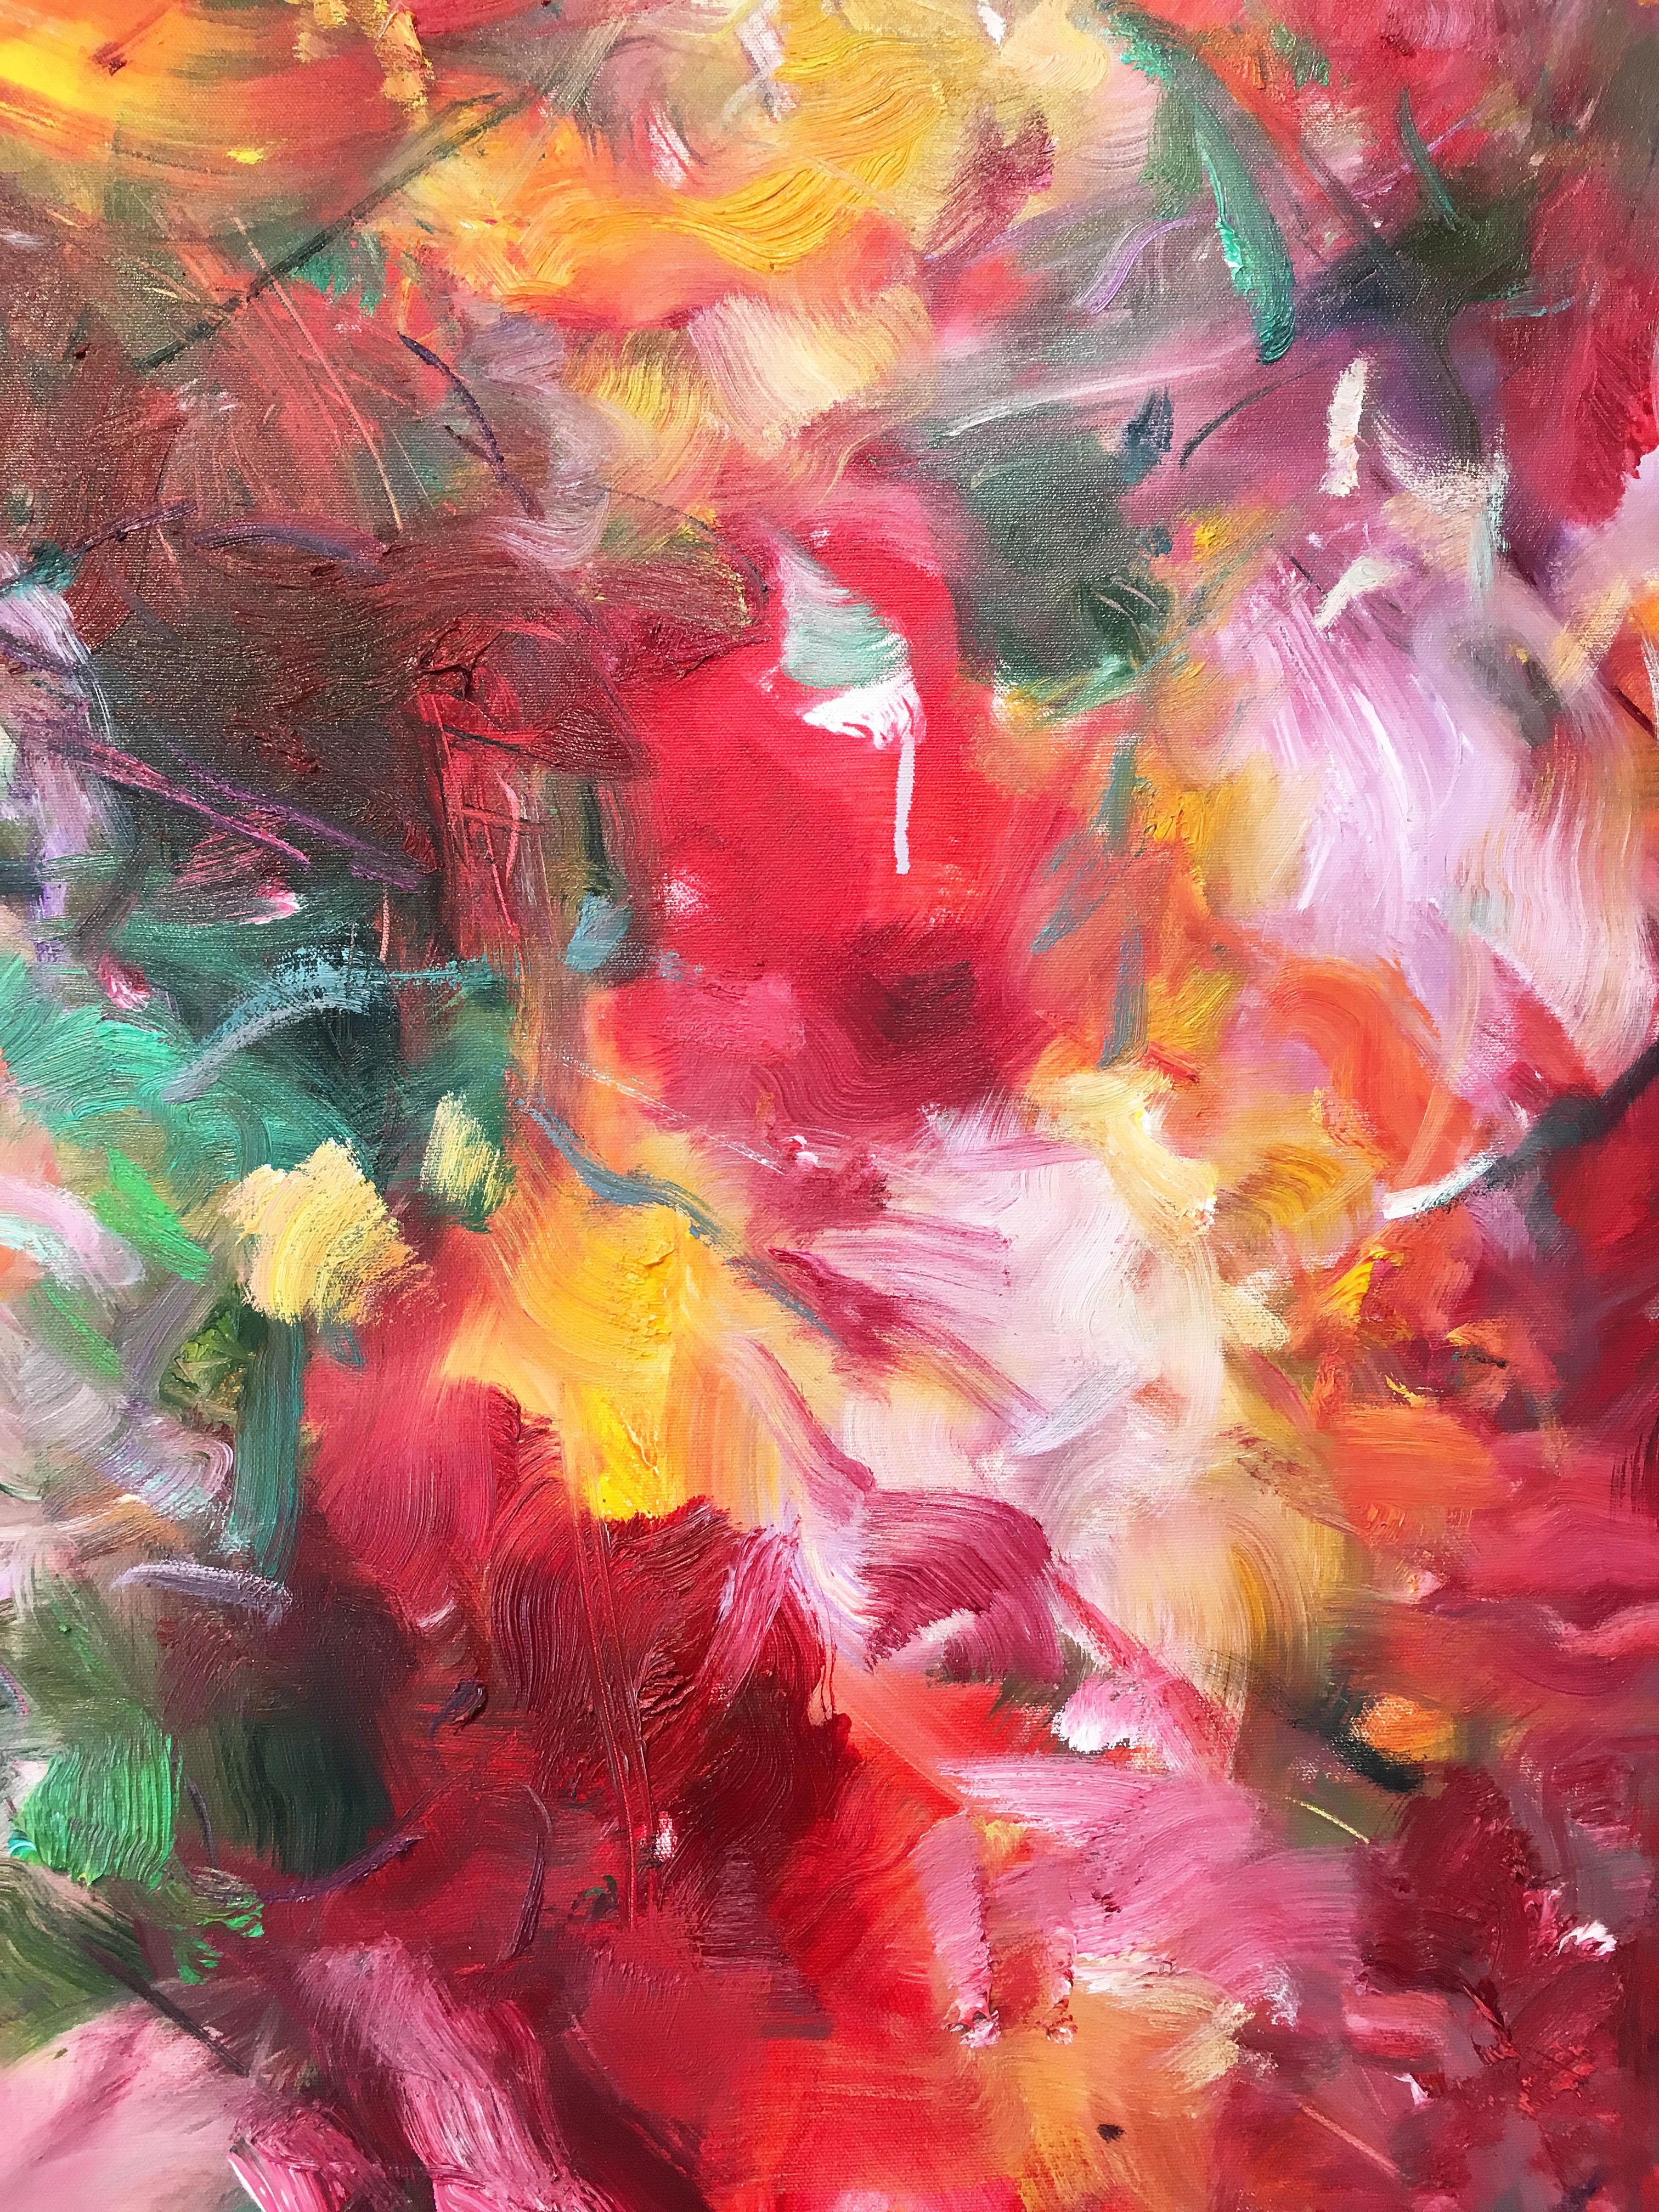 'Flowering Plants' 2018 by Chinese/Canadian artist Yangyang Pan. Oil on linen, 60 x 48 in. This beautiful abstract-impressionistic garden landscape painting incorporates large gestural brush strokes in rich colors of red, pink, yellow, purple,